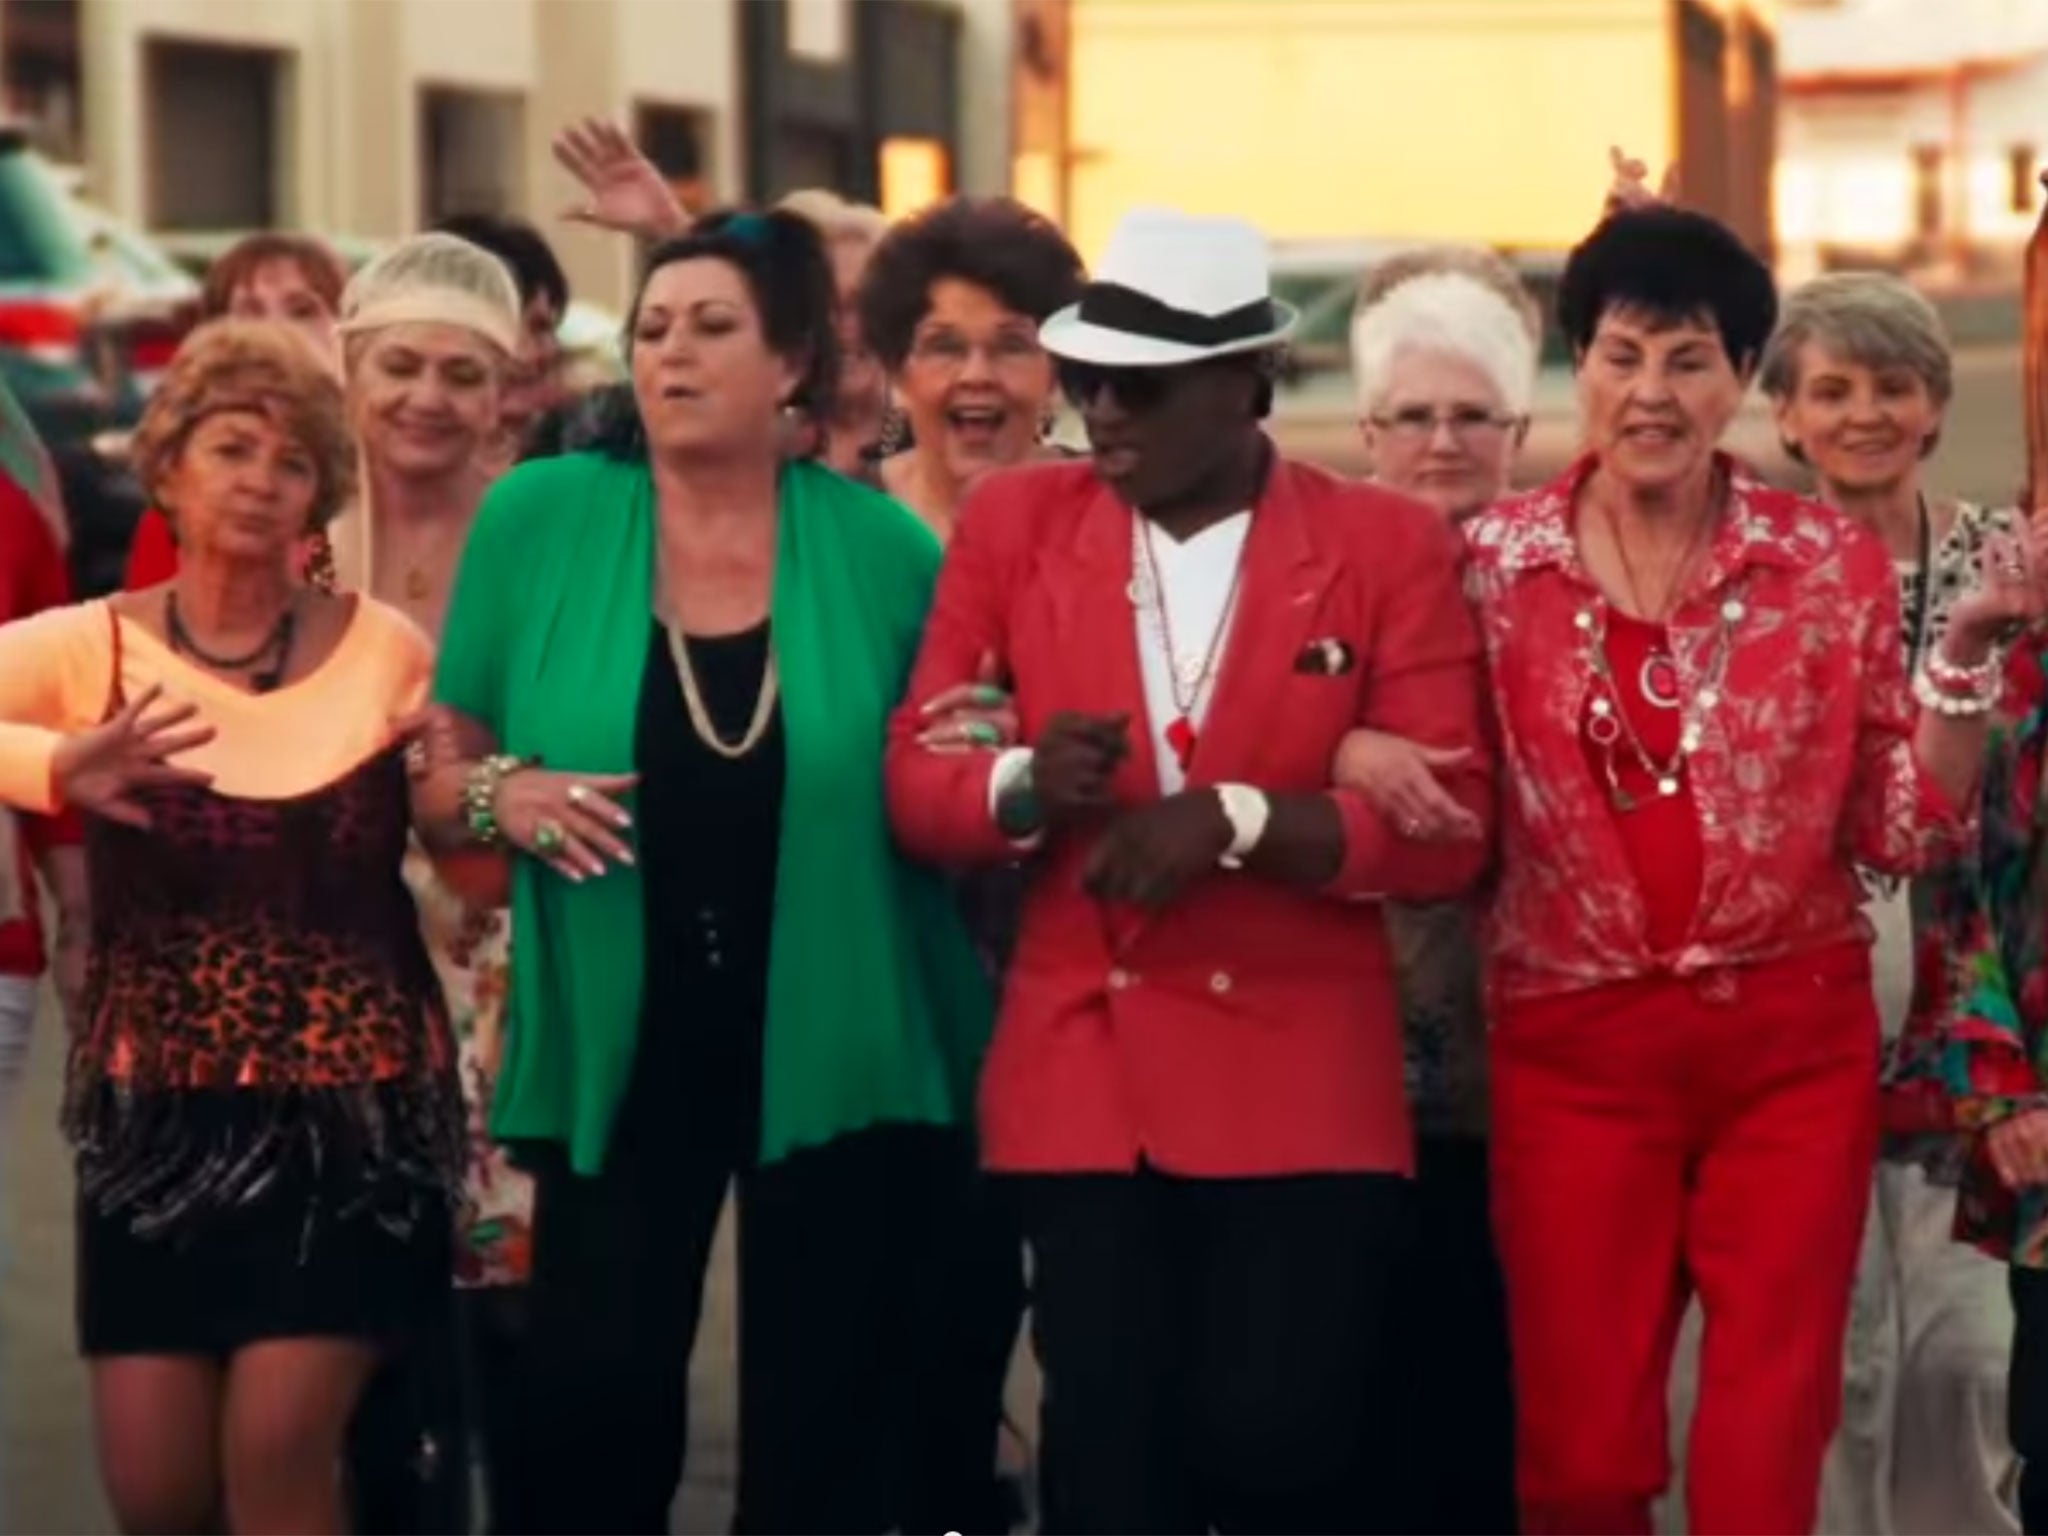 Alex Boye recreates 'Uptown Funk' with a group of 'dancing grannies'